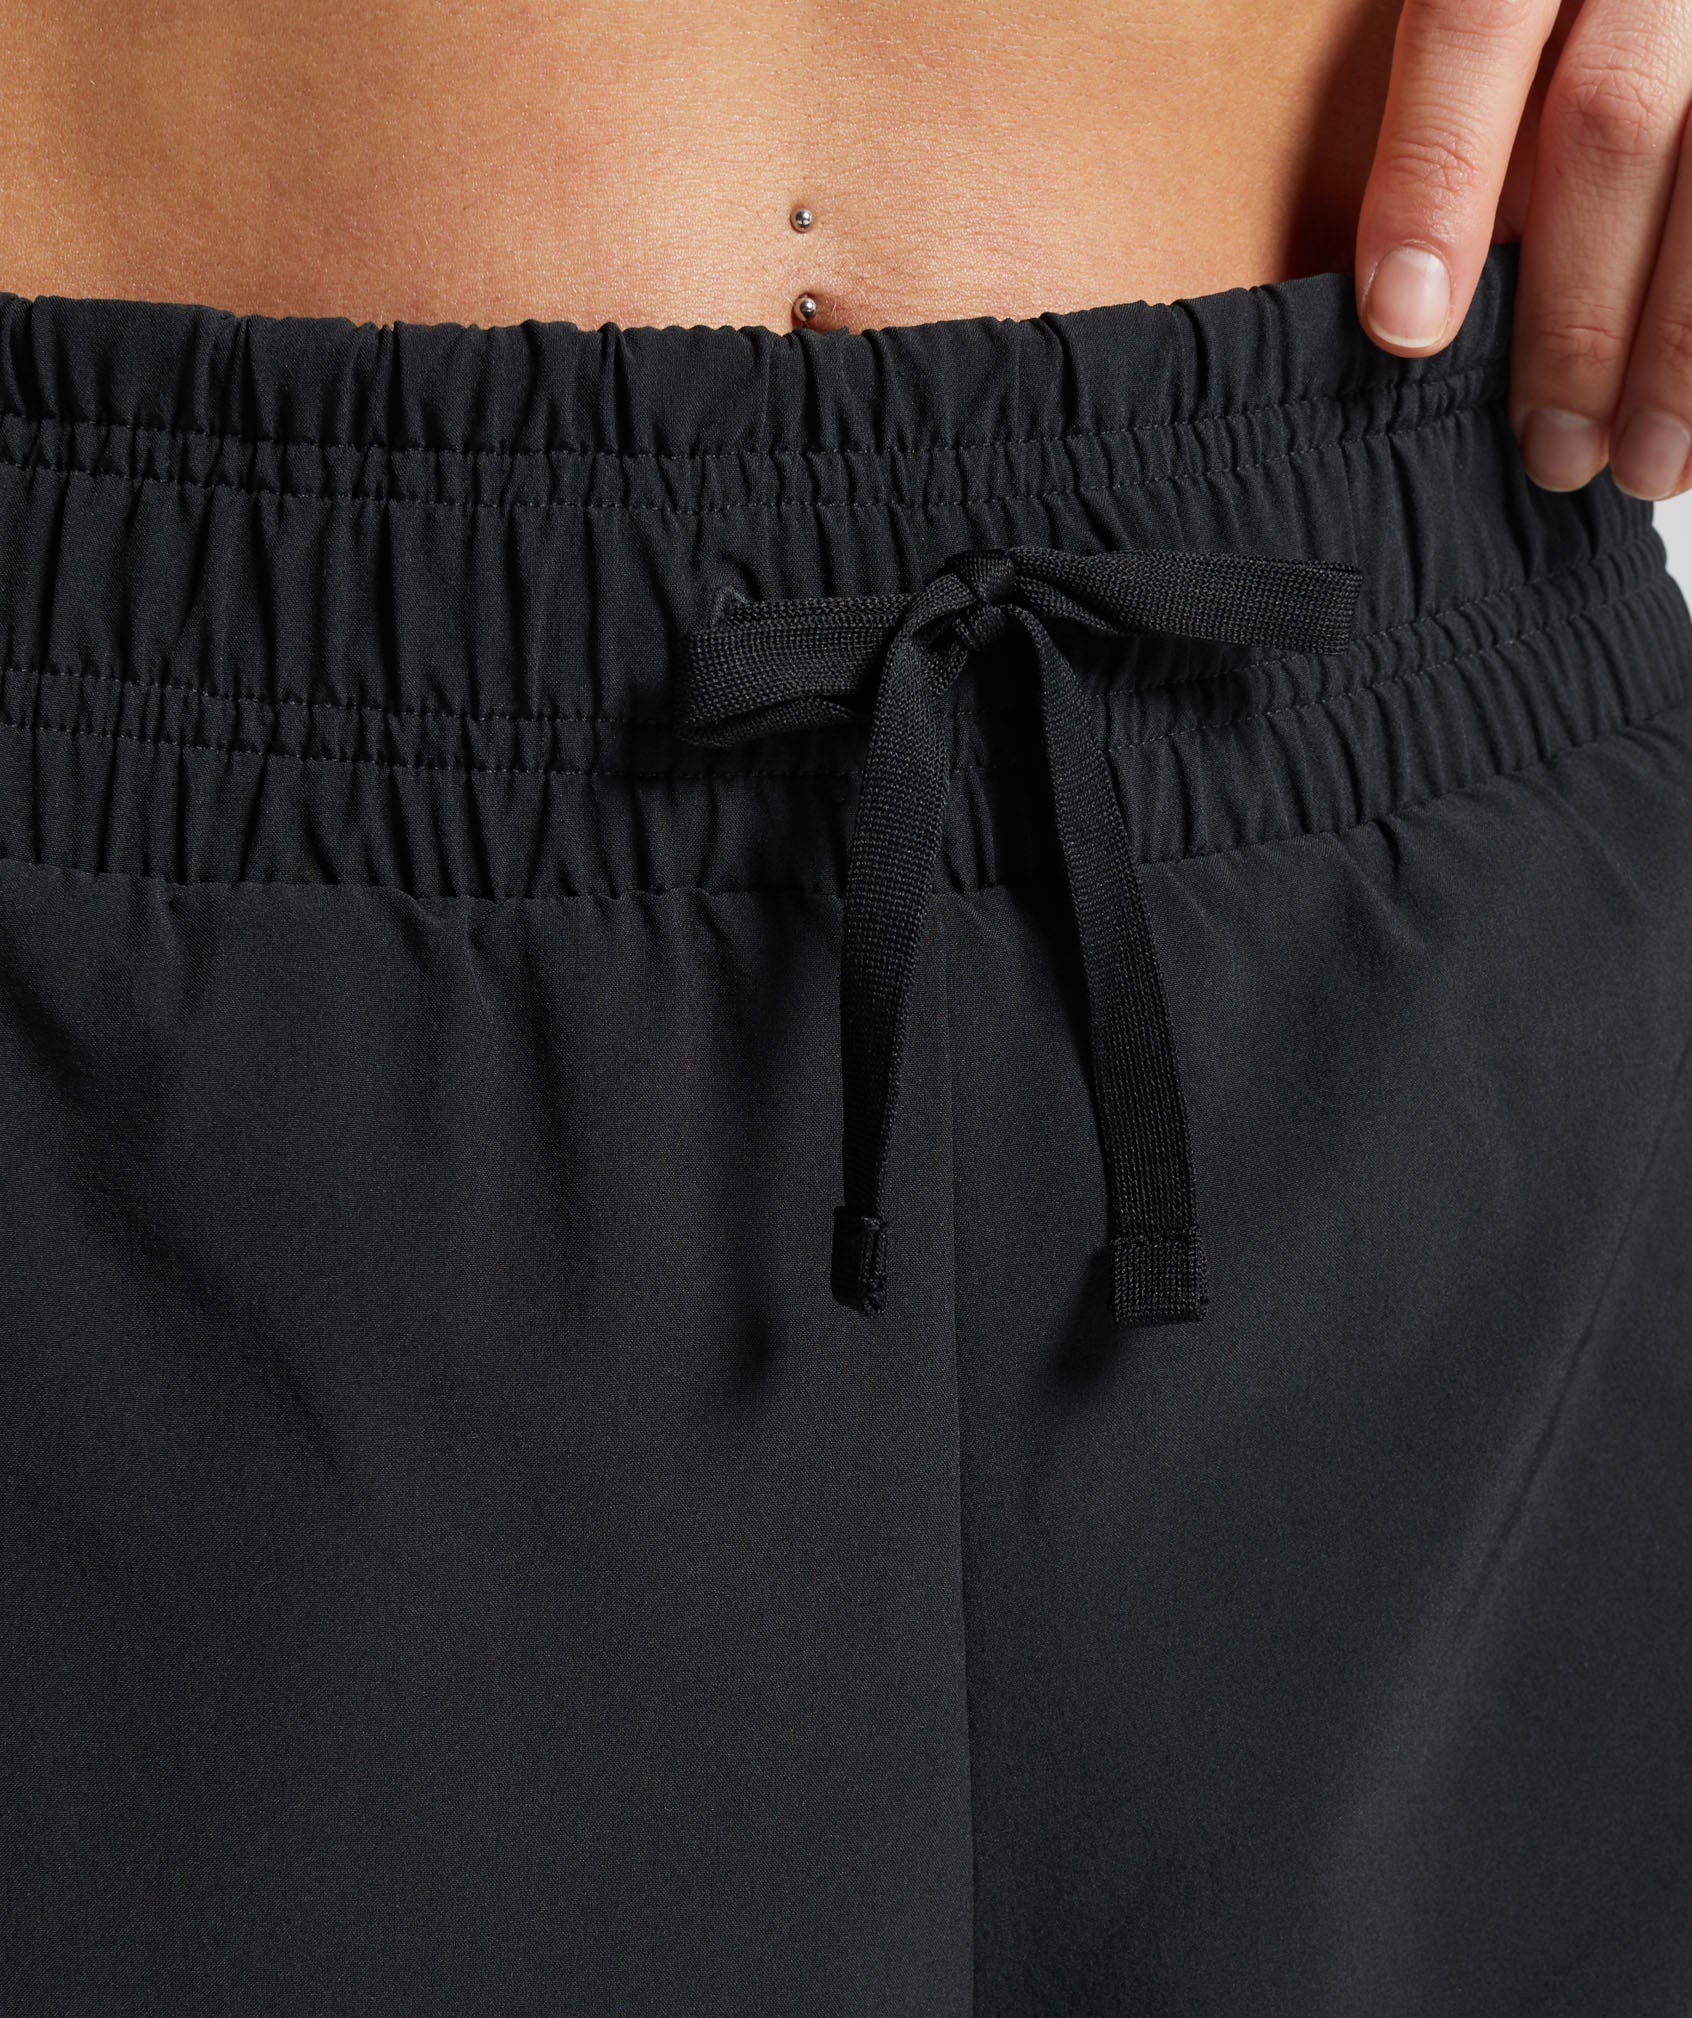 Running 2 In 1 Shorts in Black/Silhouette Grey - view 6